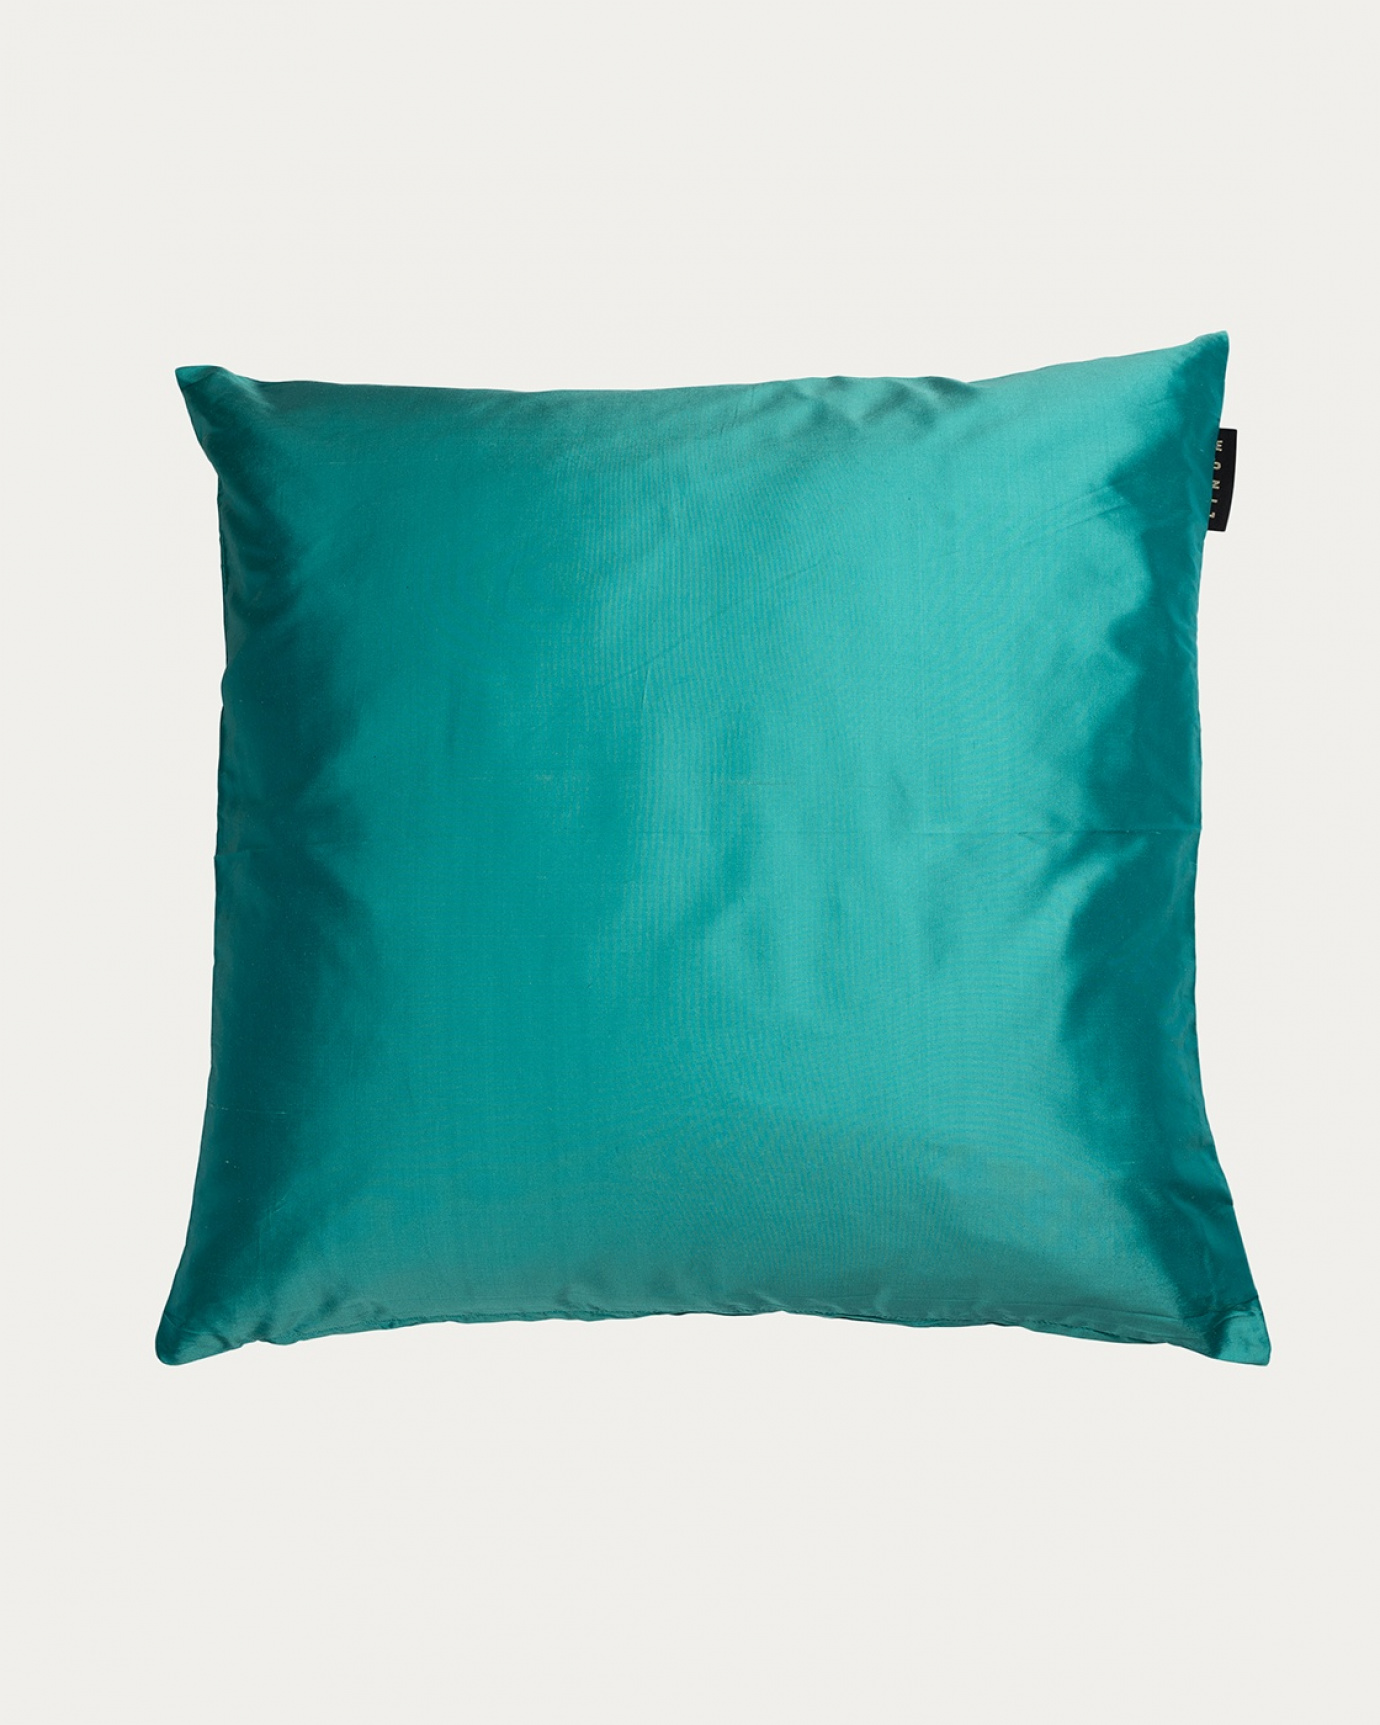 Product image turquoise SILK cushion cover made of 100% dupion silk that gives a nice lustre from LINUM DESIGN. Size 50x50 cm.